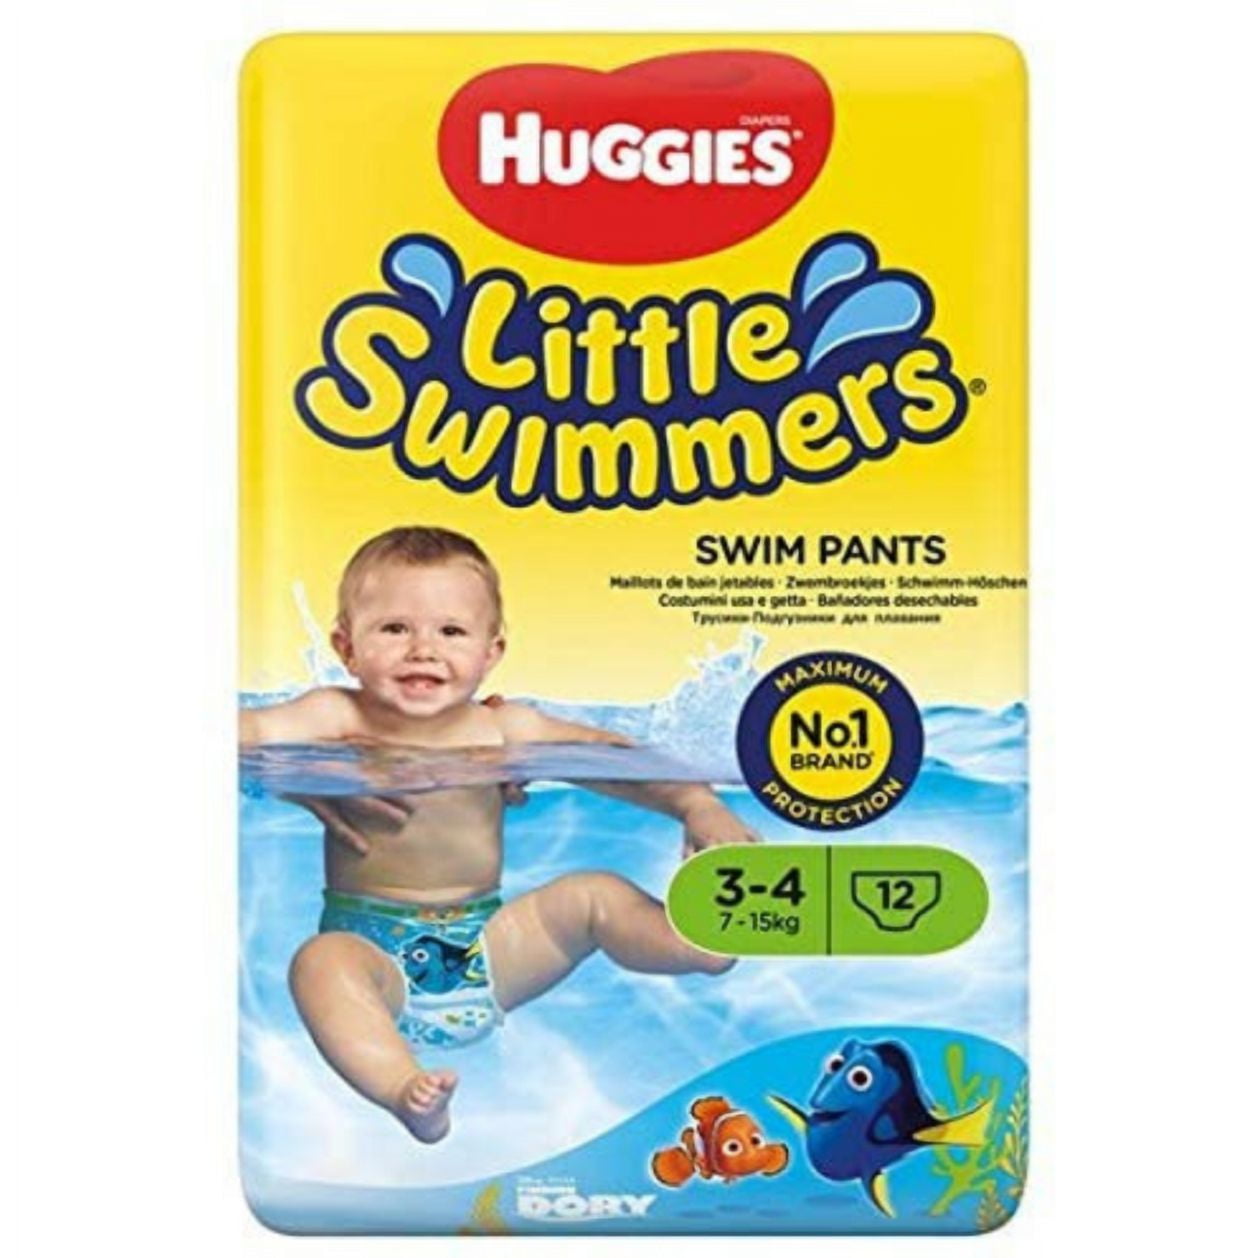 8 couches de bain piscine 3-4( 7-15kg ) huggies little swimmers - Little  Swimmers - 12 mois | Beebs